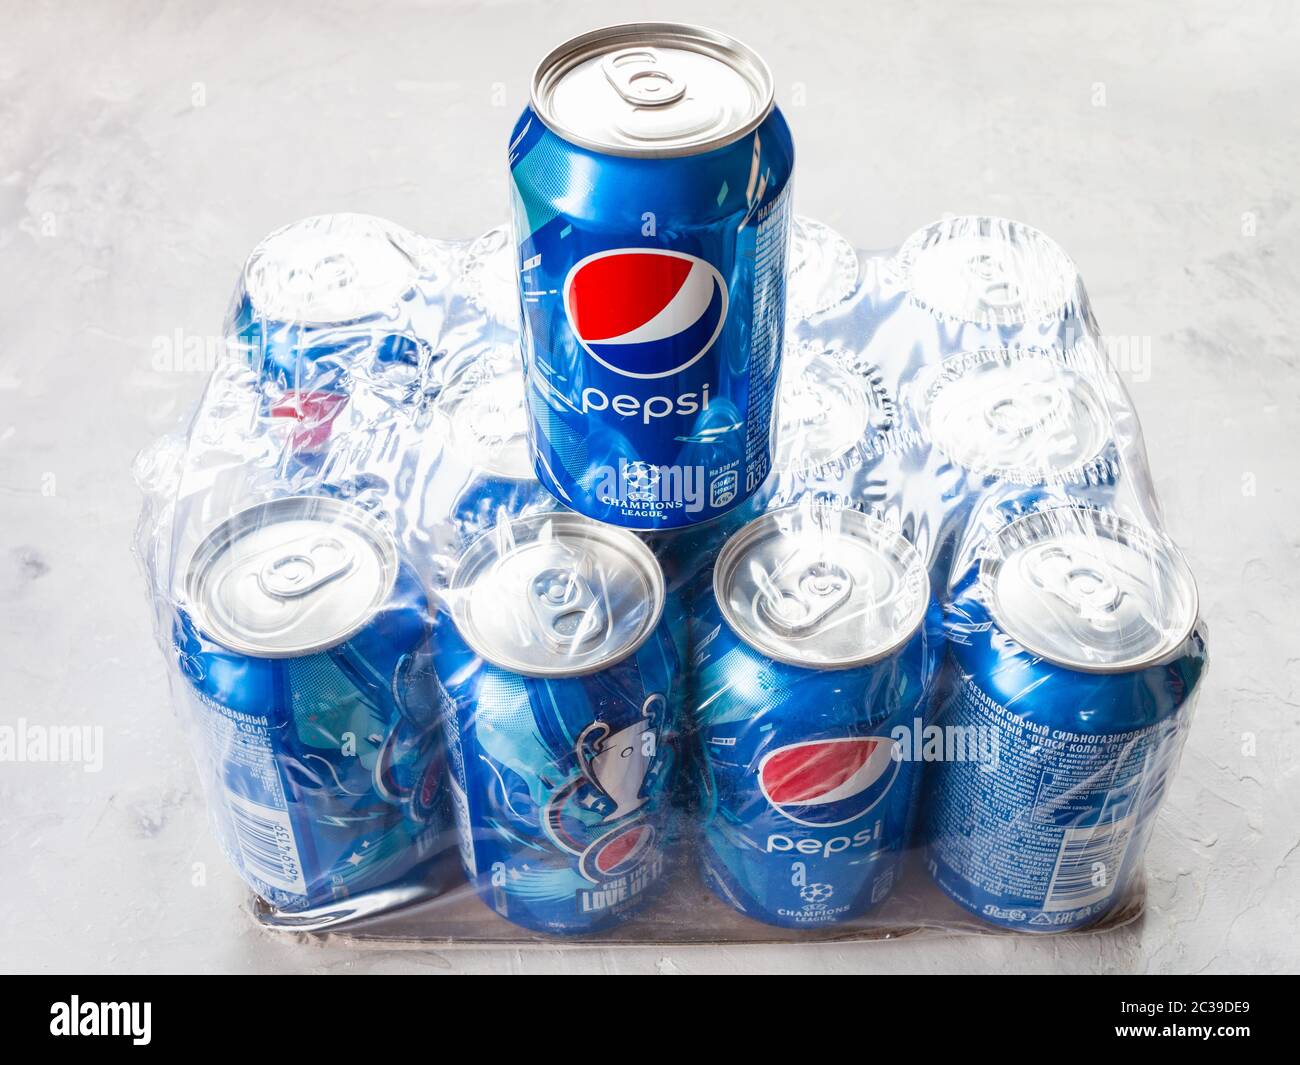 MOSCOW, RUSSIA - JUNE 17, 2020: closed can of Pepsi with logo of UEFA Champions League stays pack of dozen cans on concrete floor. Pepsi is carbonated Stock Photo